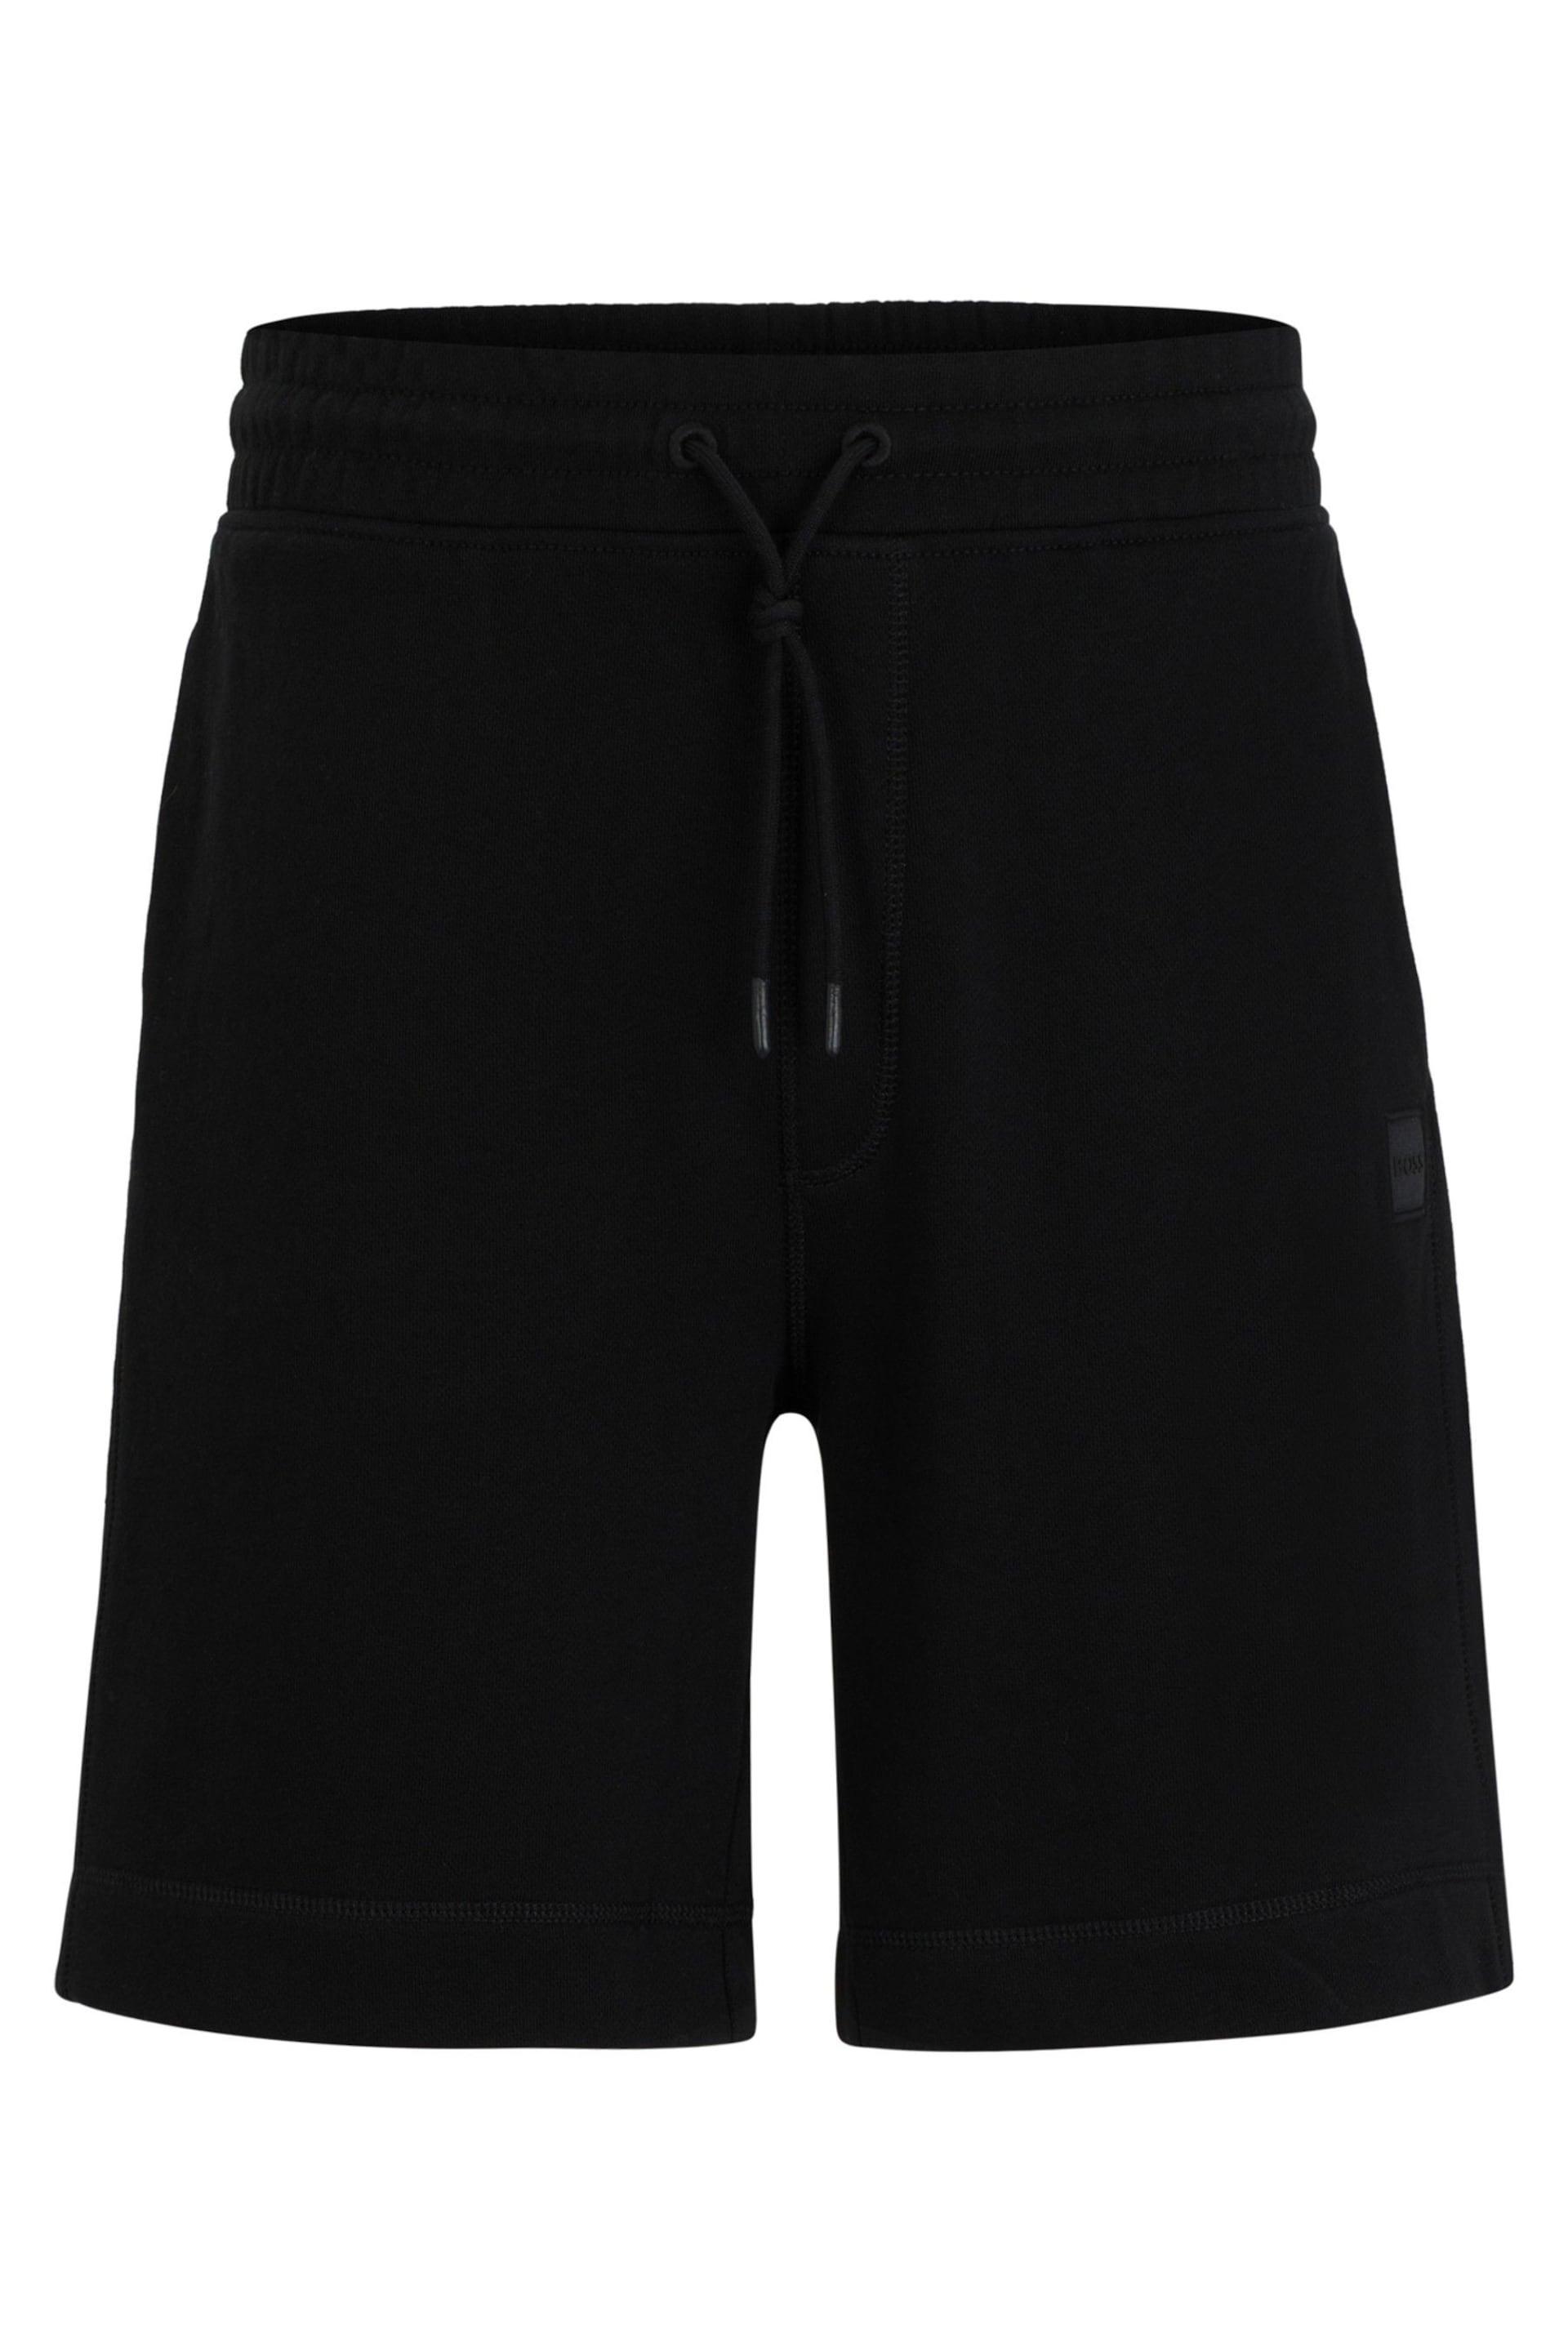 BOSS Black Cotton-Terry Regular-Fit Shorts With Logo Badge - Image 5 of 6